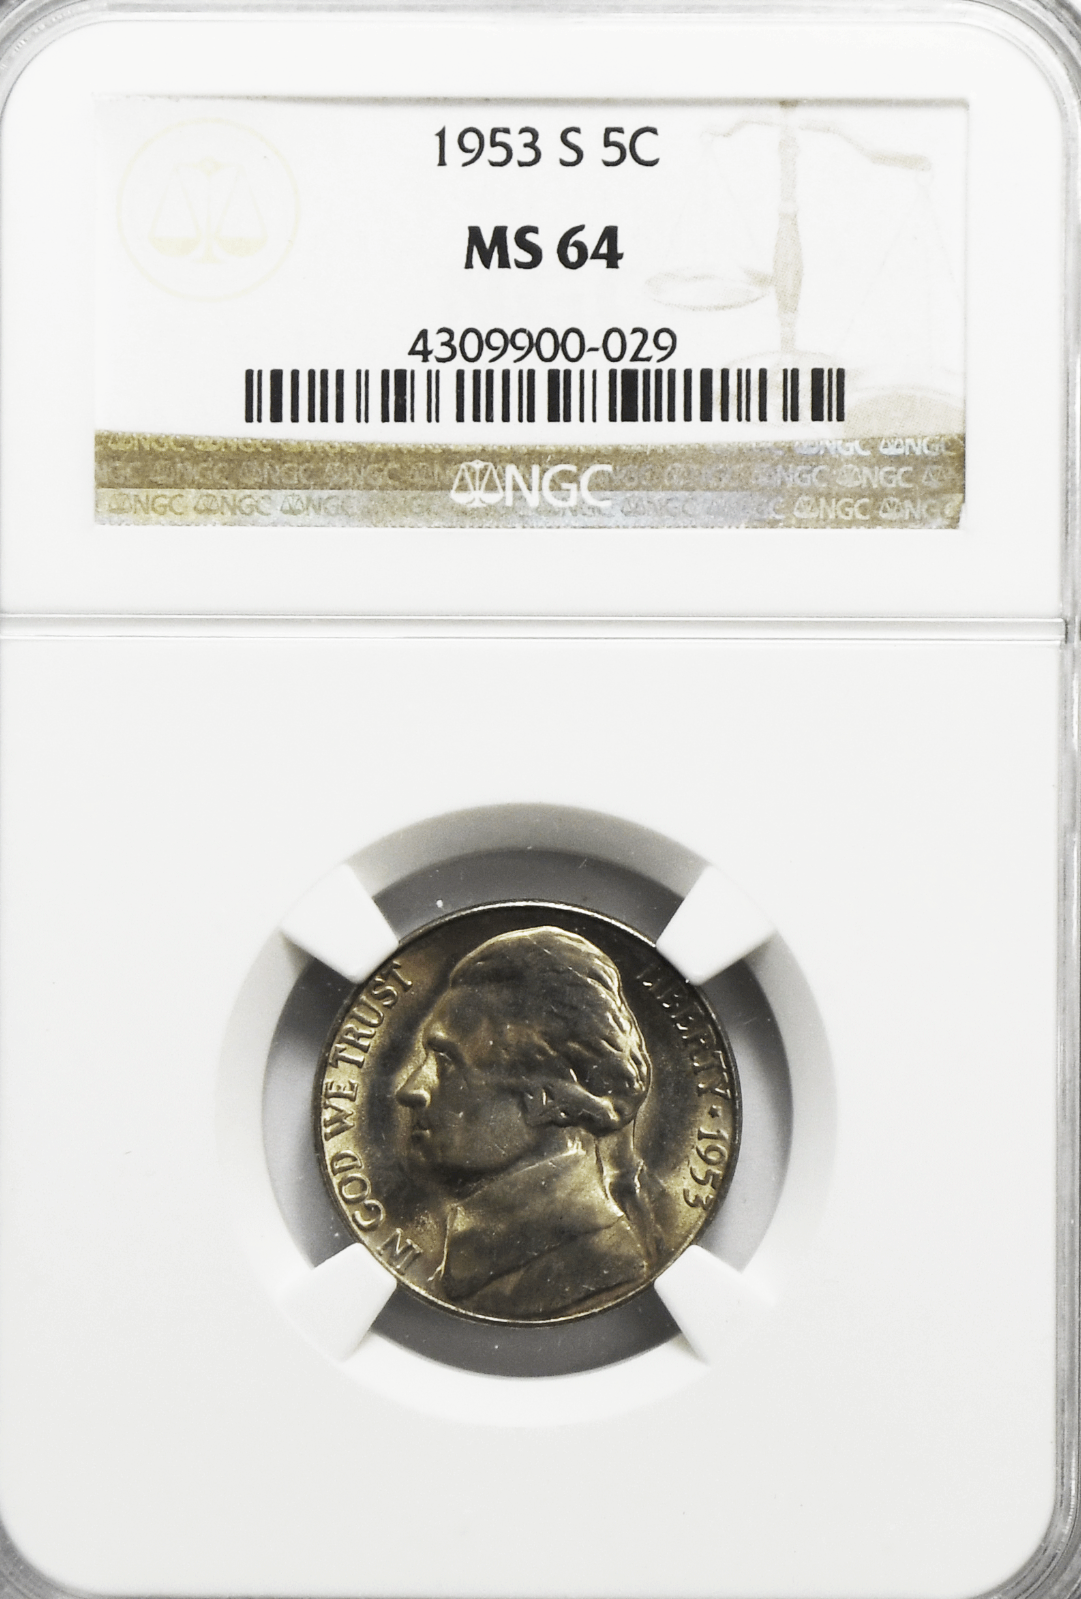 1953 S 5c Jefferson Nickel NGC Five Cents MS64 Brilliant Uncirculated